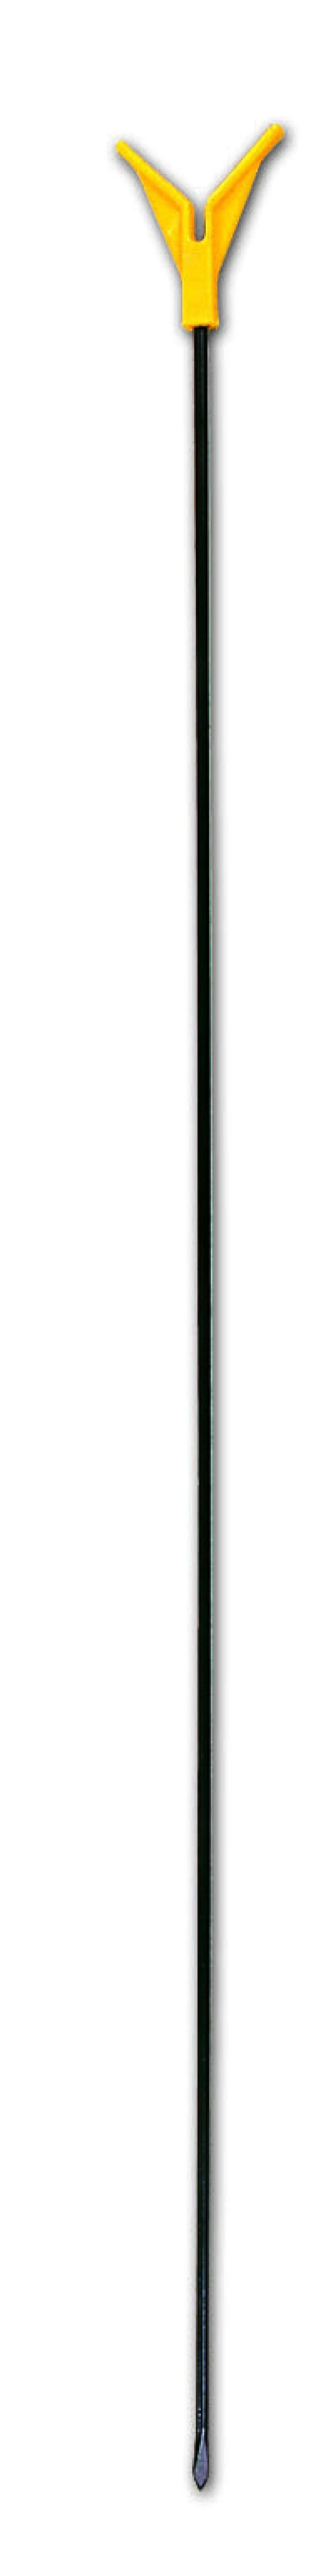 Fish Bank Stick 3/16mm with V Top 60 cm